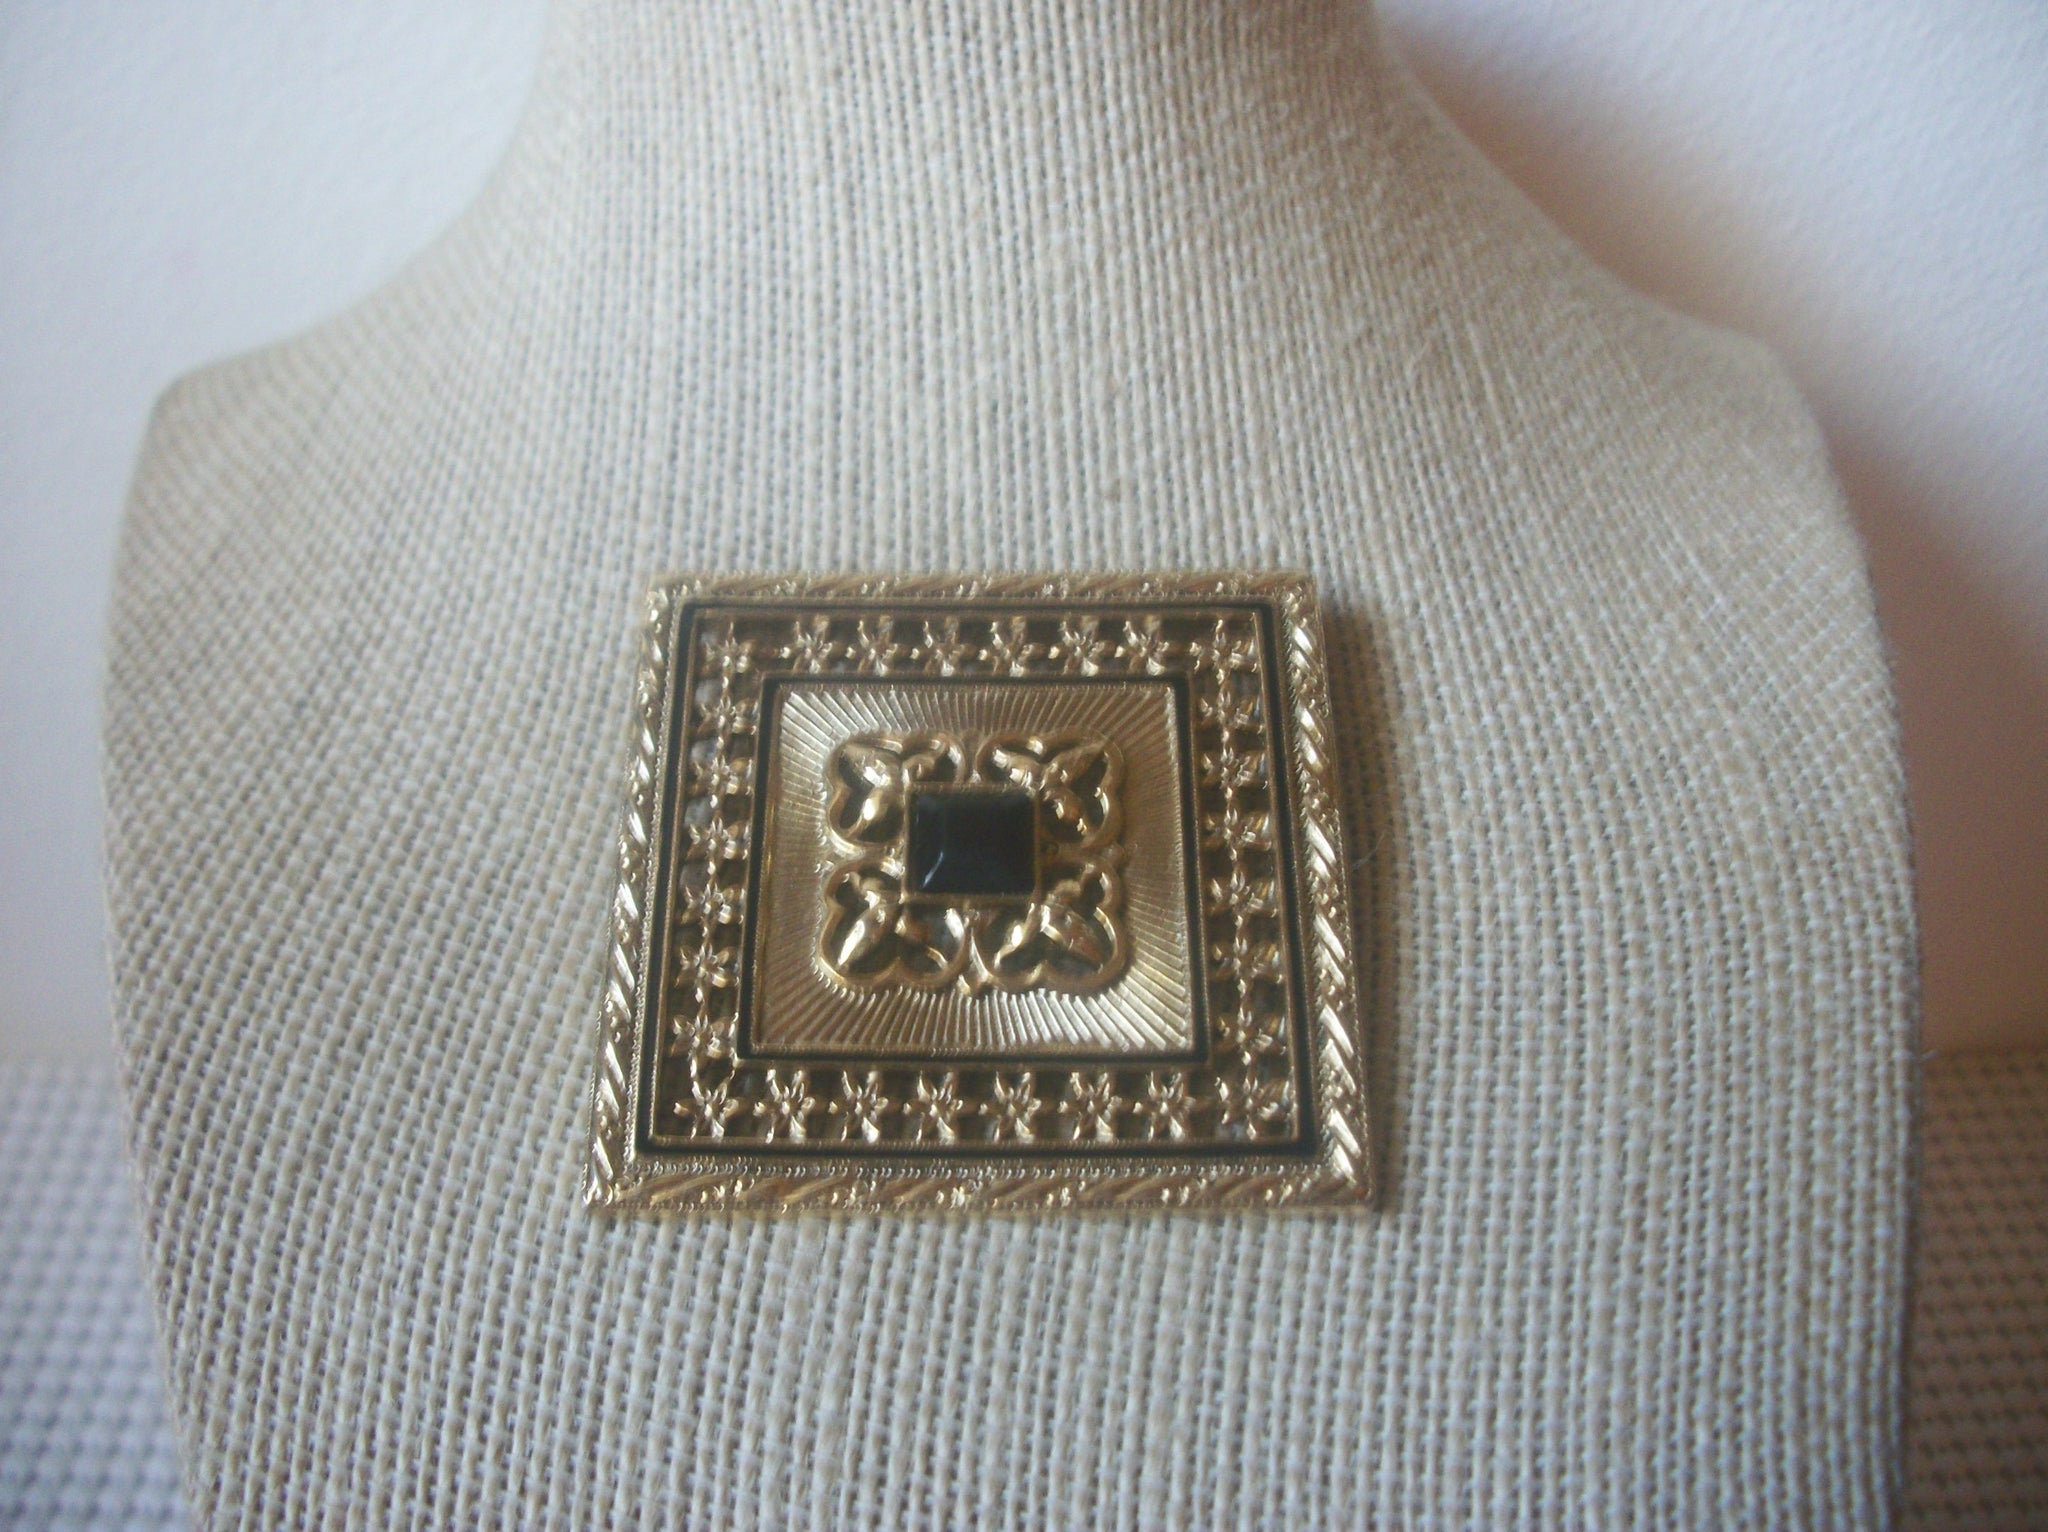 Larger, Spanish Damasque, Gold Tone, Square Black Faux Stone, Vintage Brooch Pin 60218